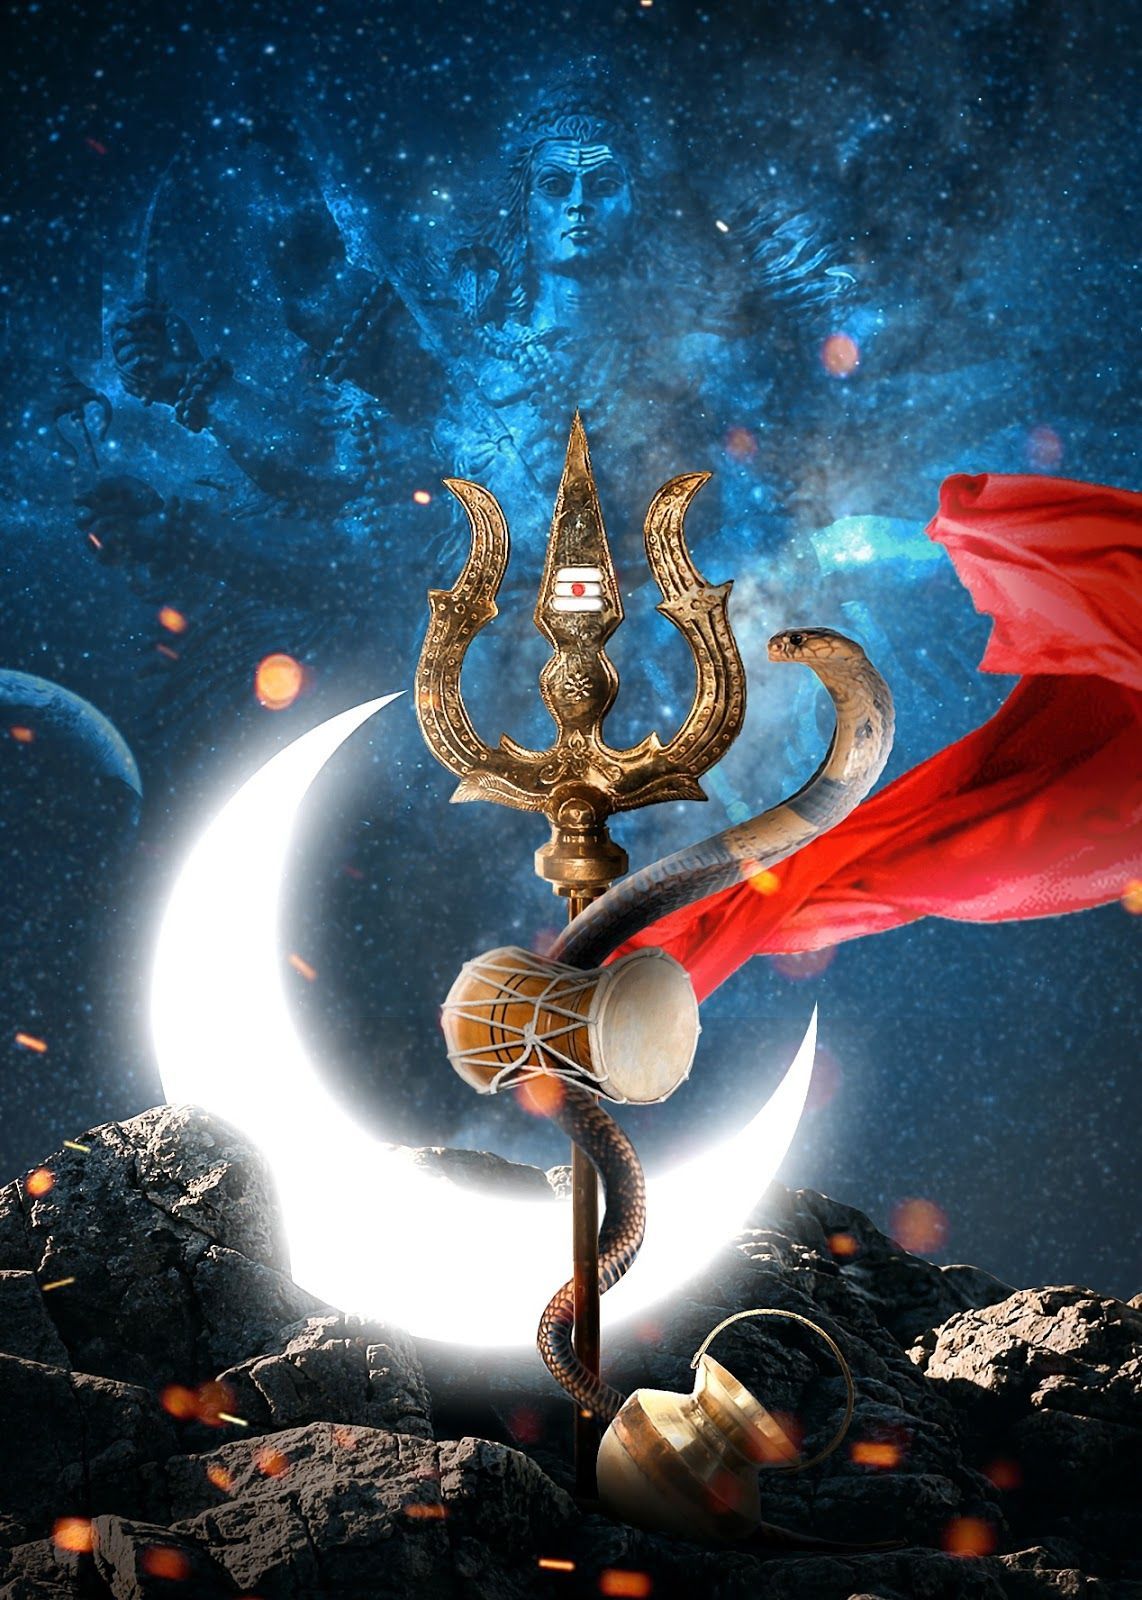 hd pics of lord shiva for wallpaper
